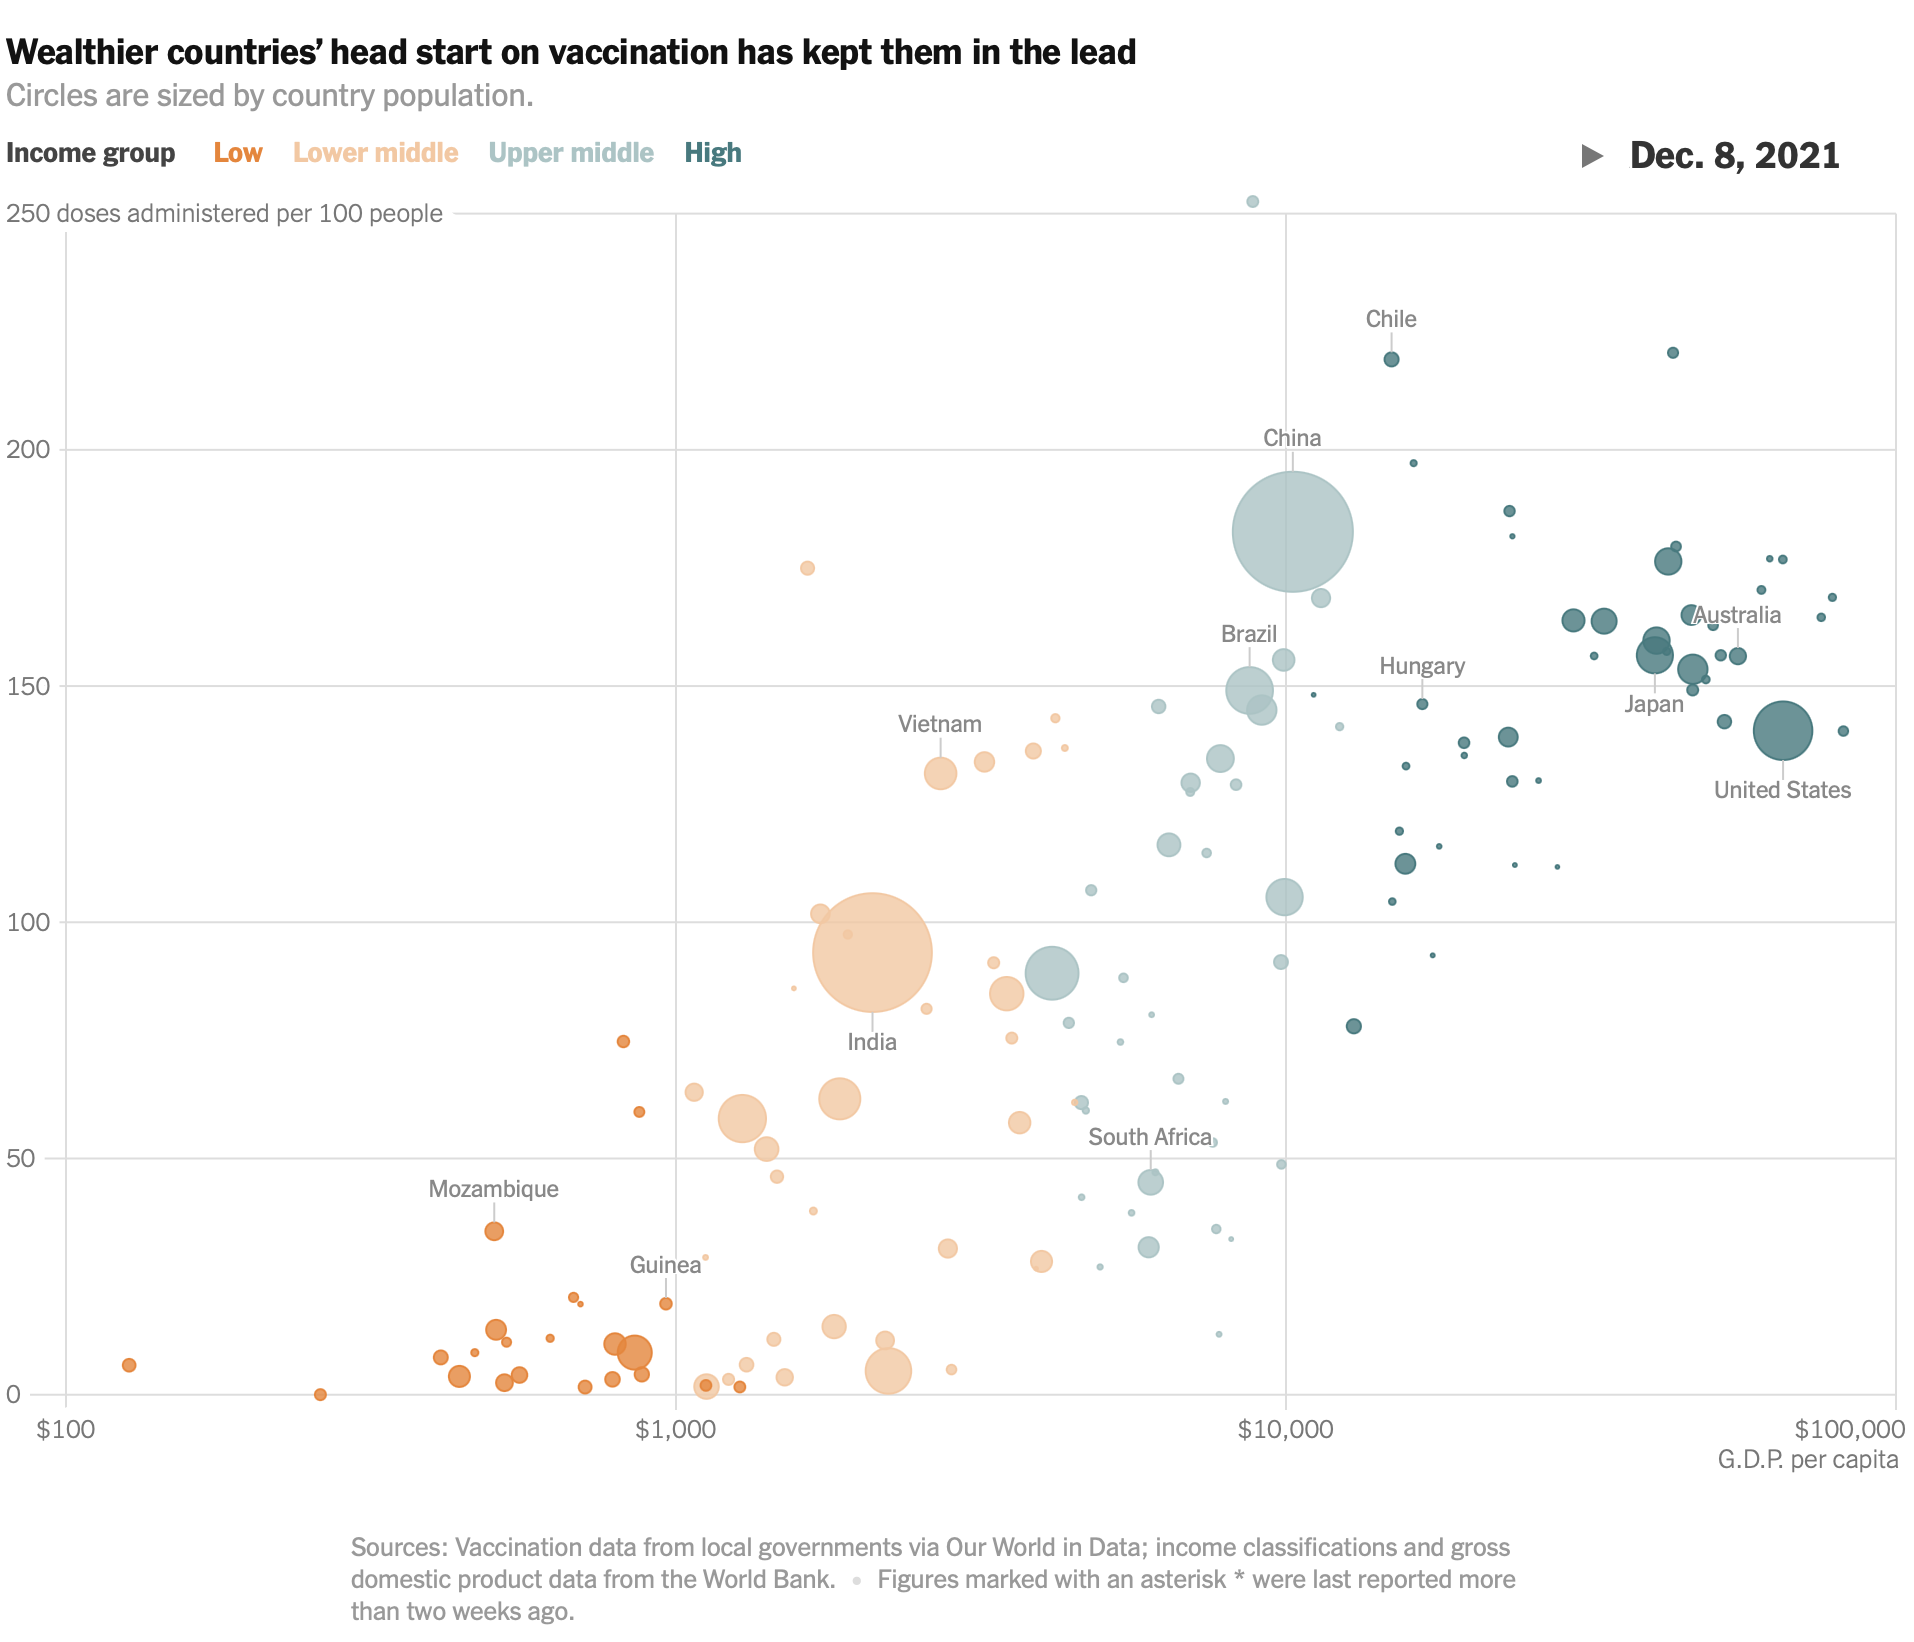 Vaccination rates compared against country wealth